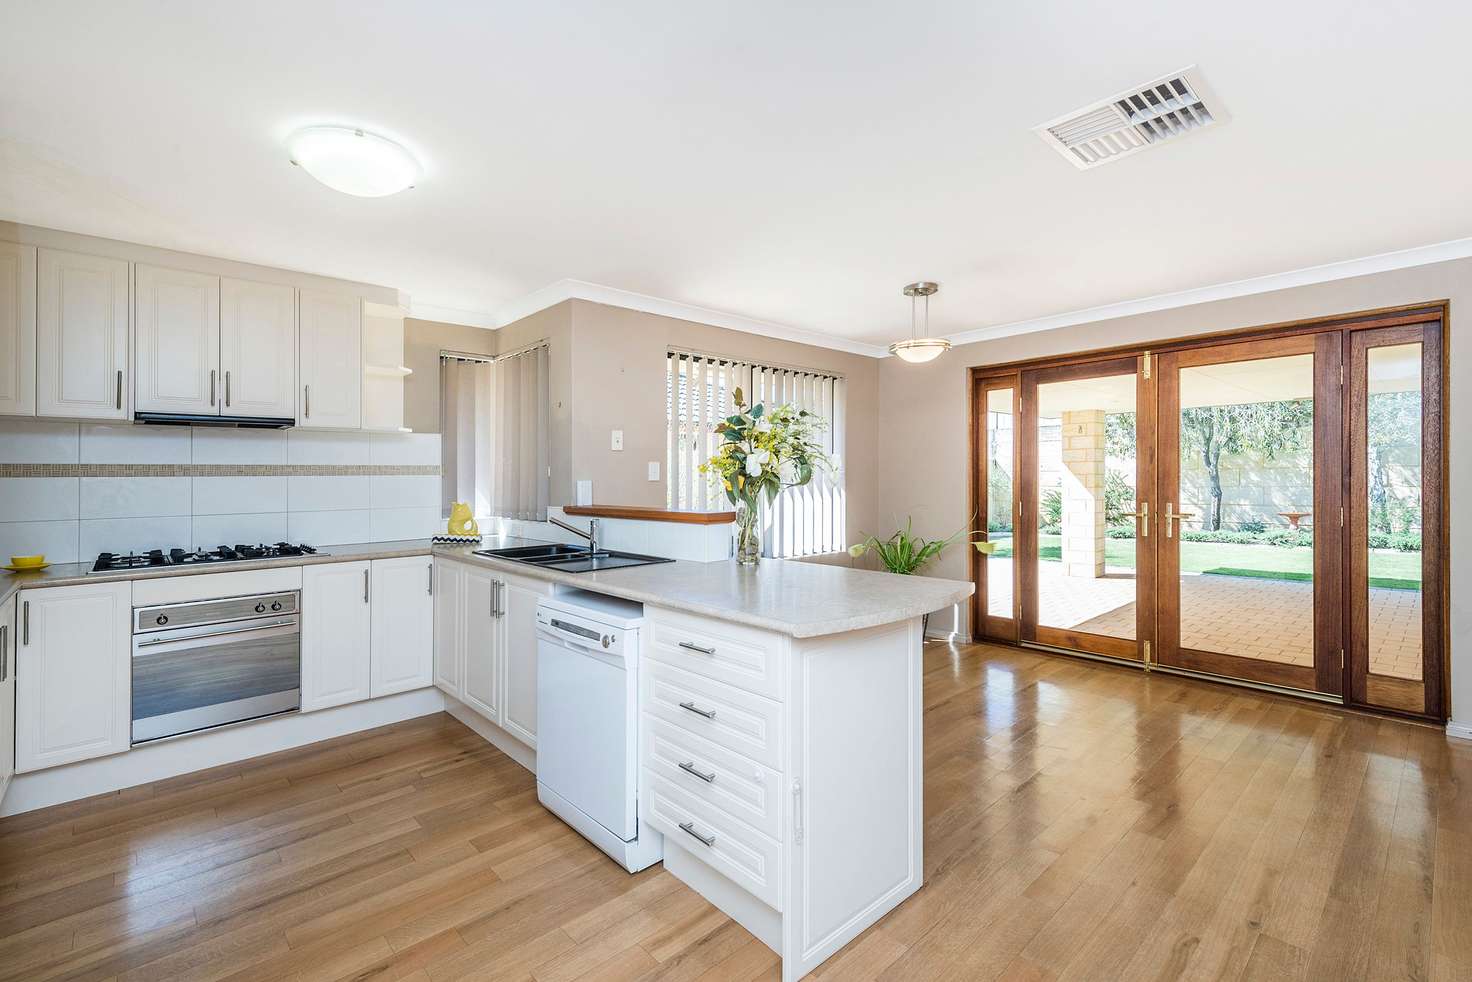 Main view of Homely house listing, 15 Tuomey Follow, Baldivis WA 6171